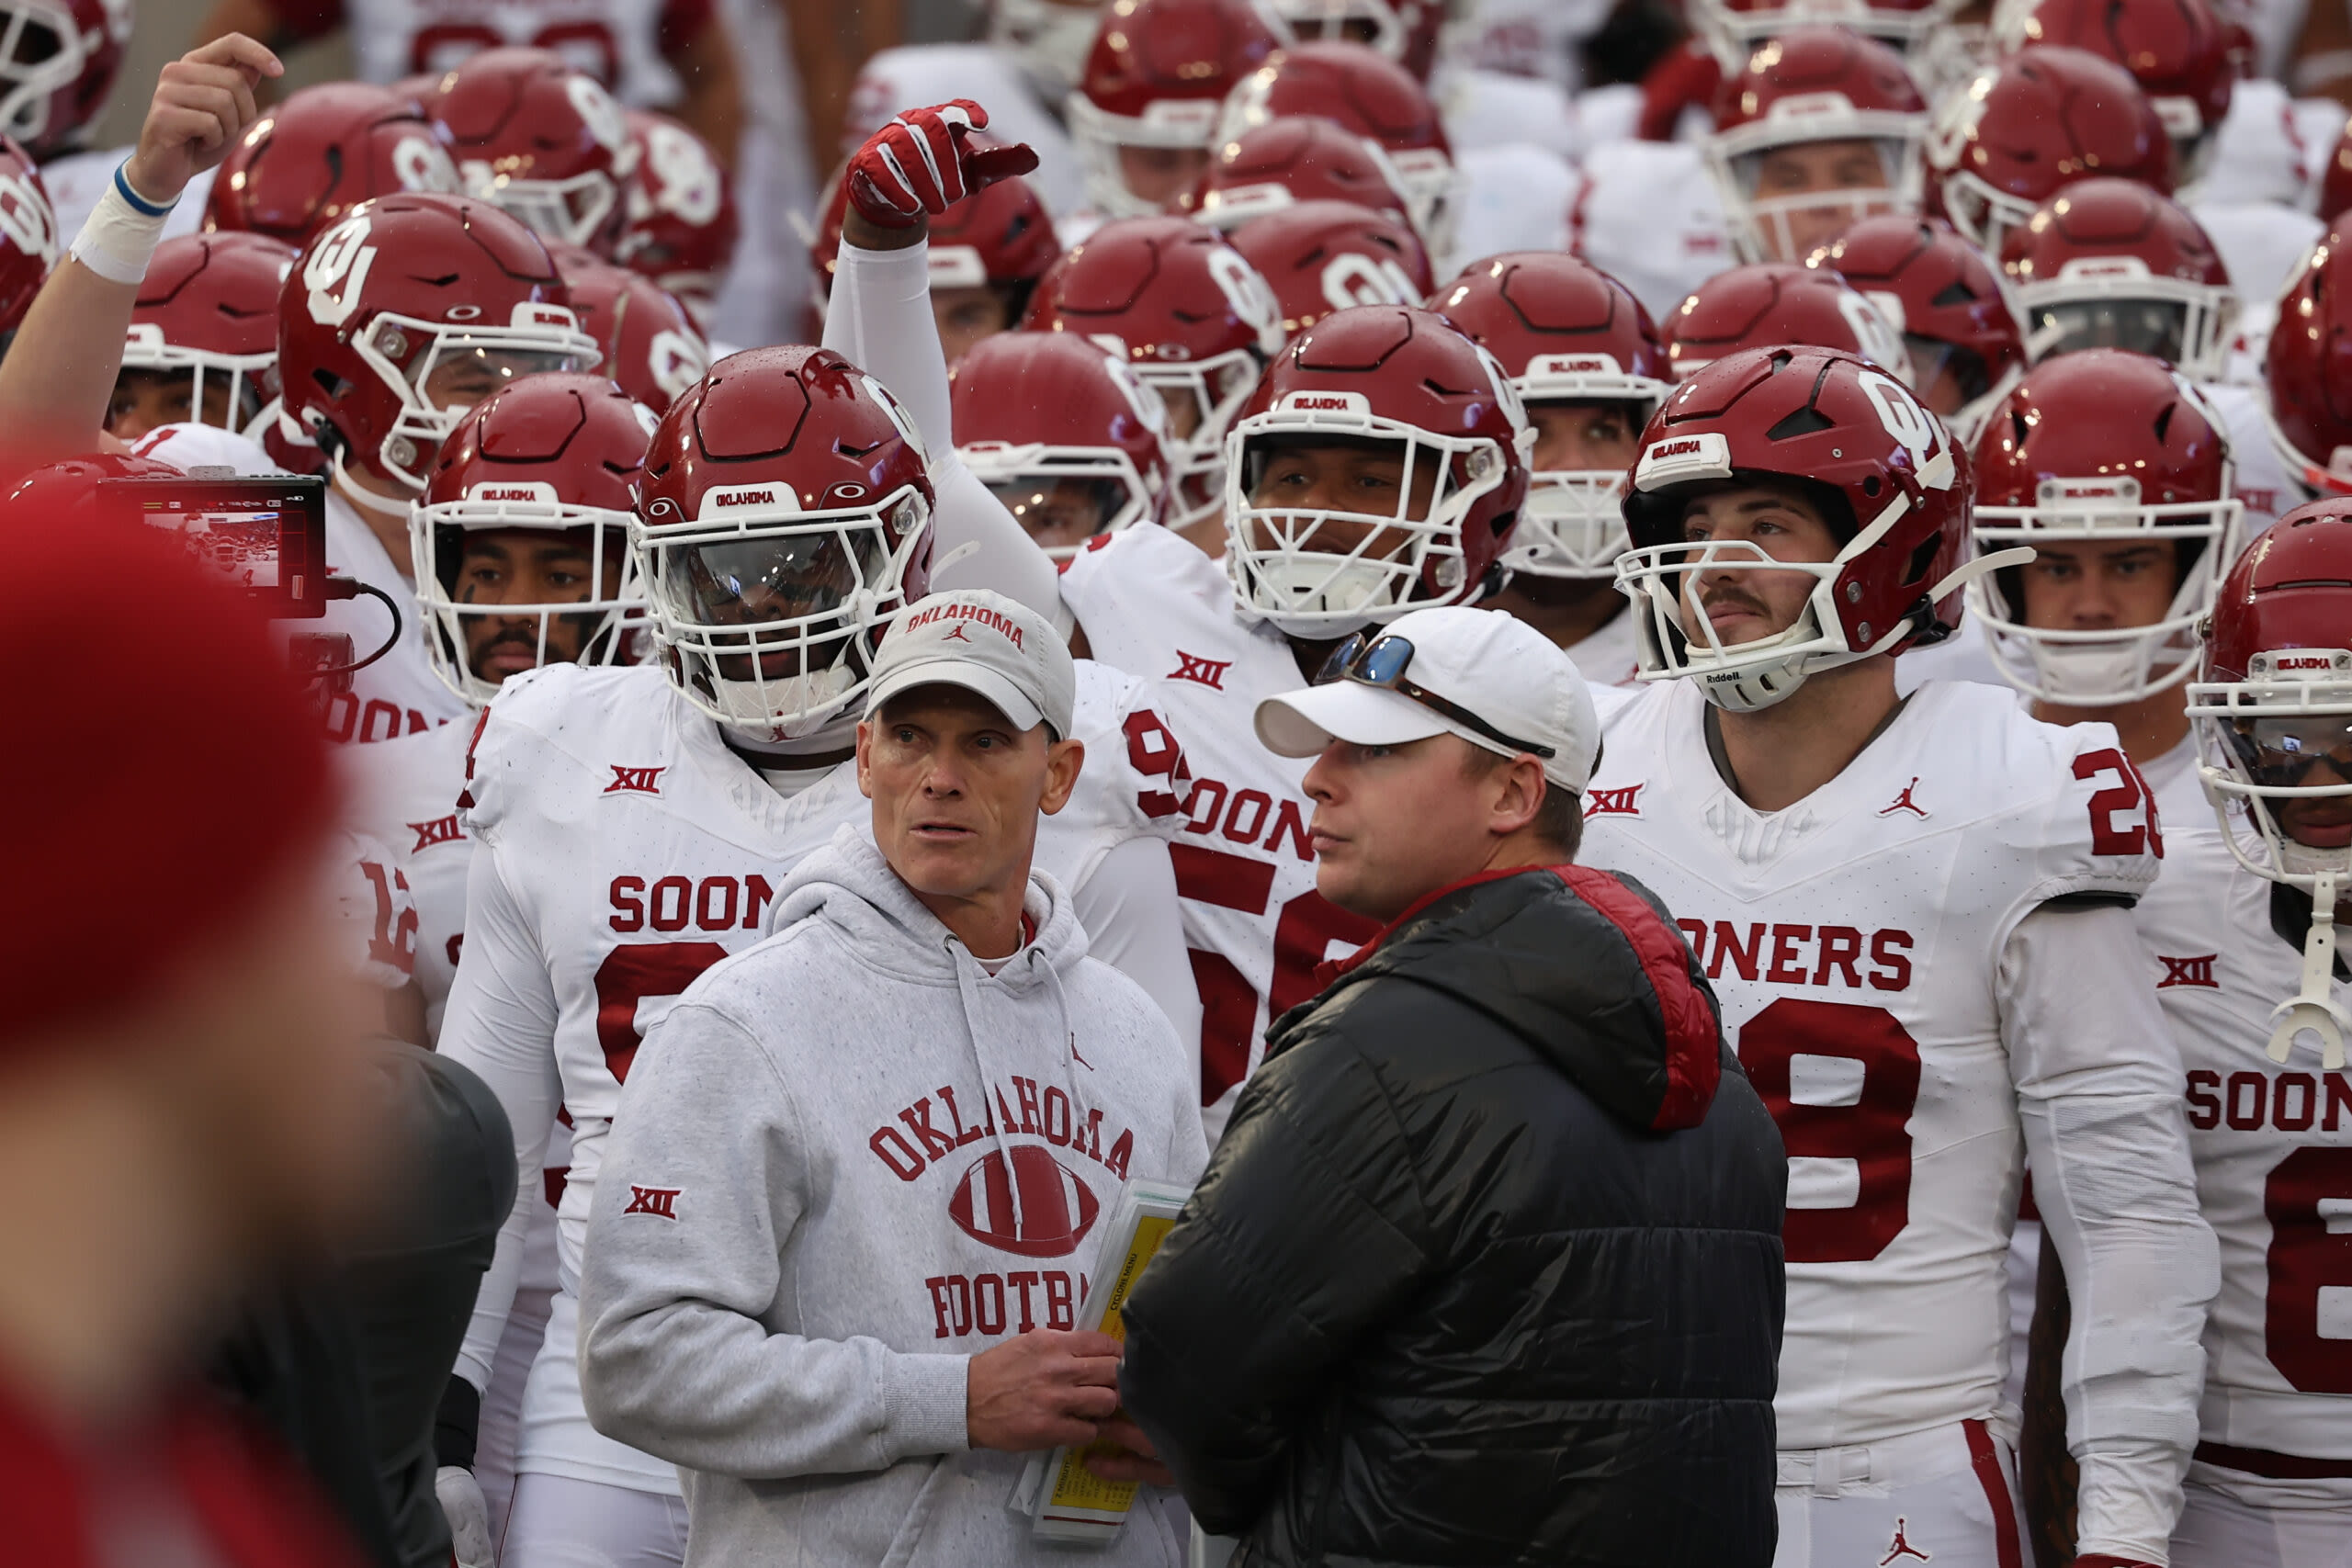 Are the Oklahoma Sooners overvalued in the ESPN Football Power Index?